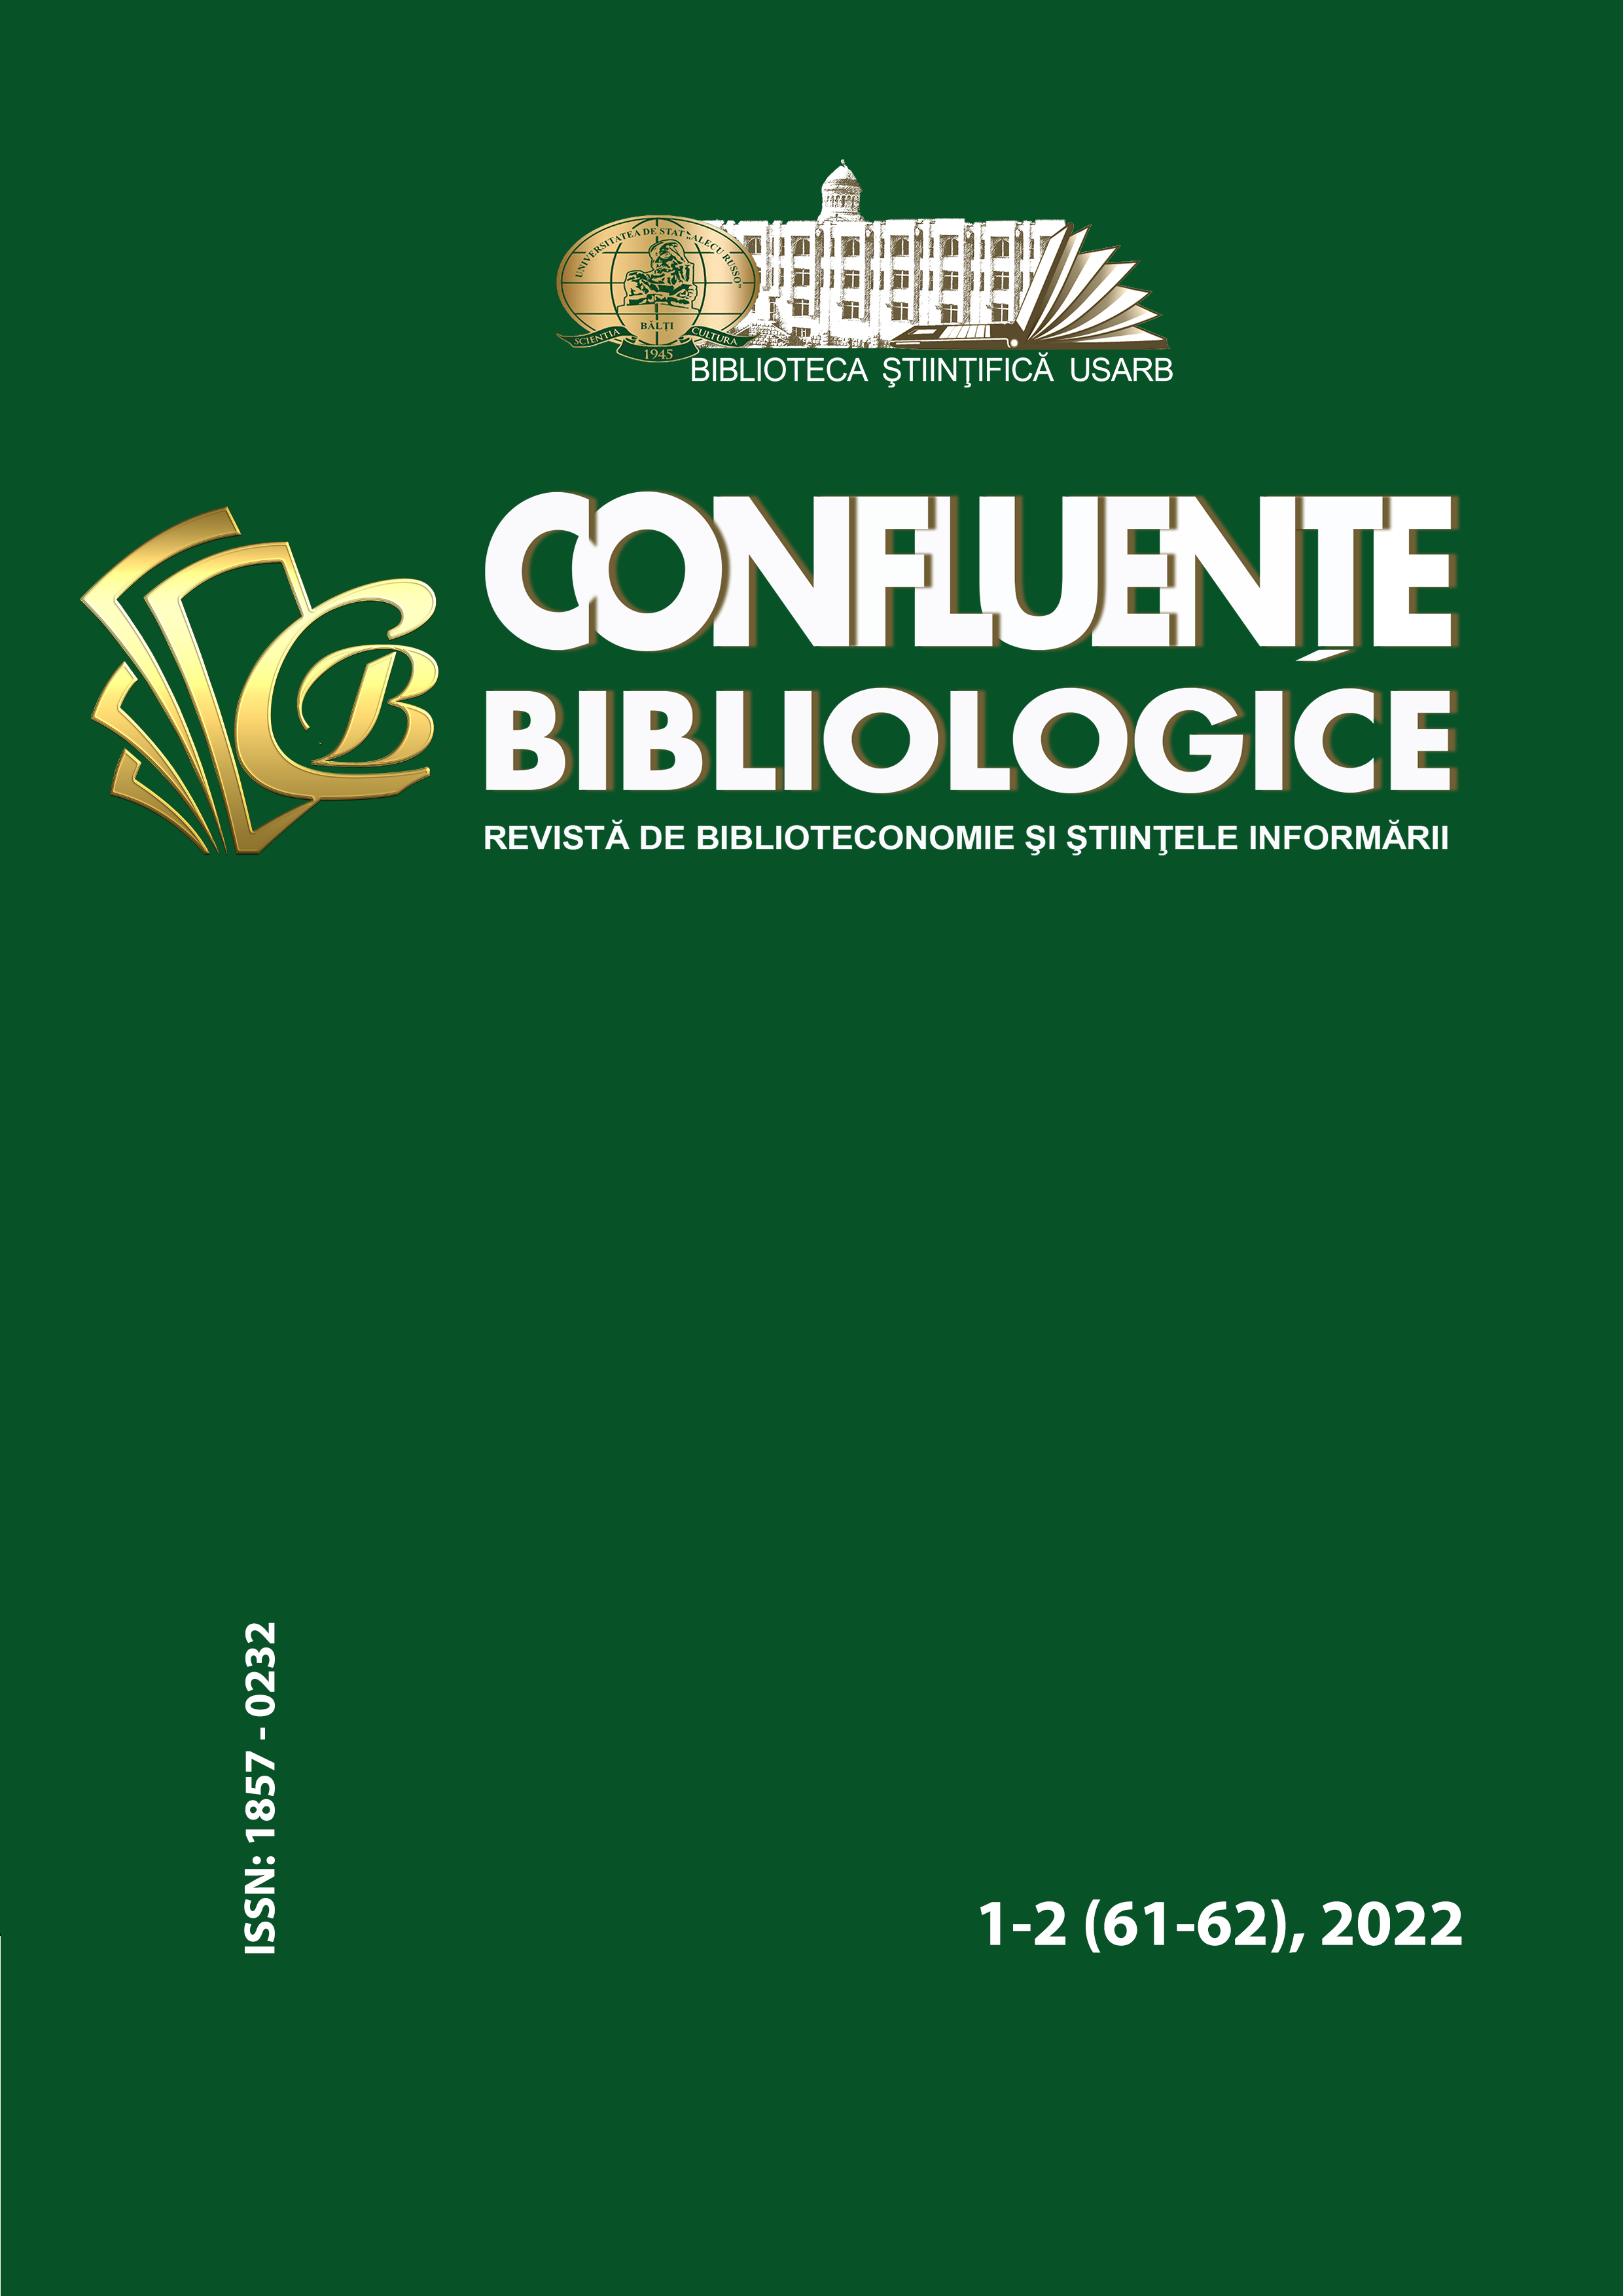 USARB SCIENTIFIC LIBRARY IN 2022 Cover Image